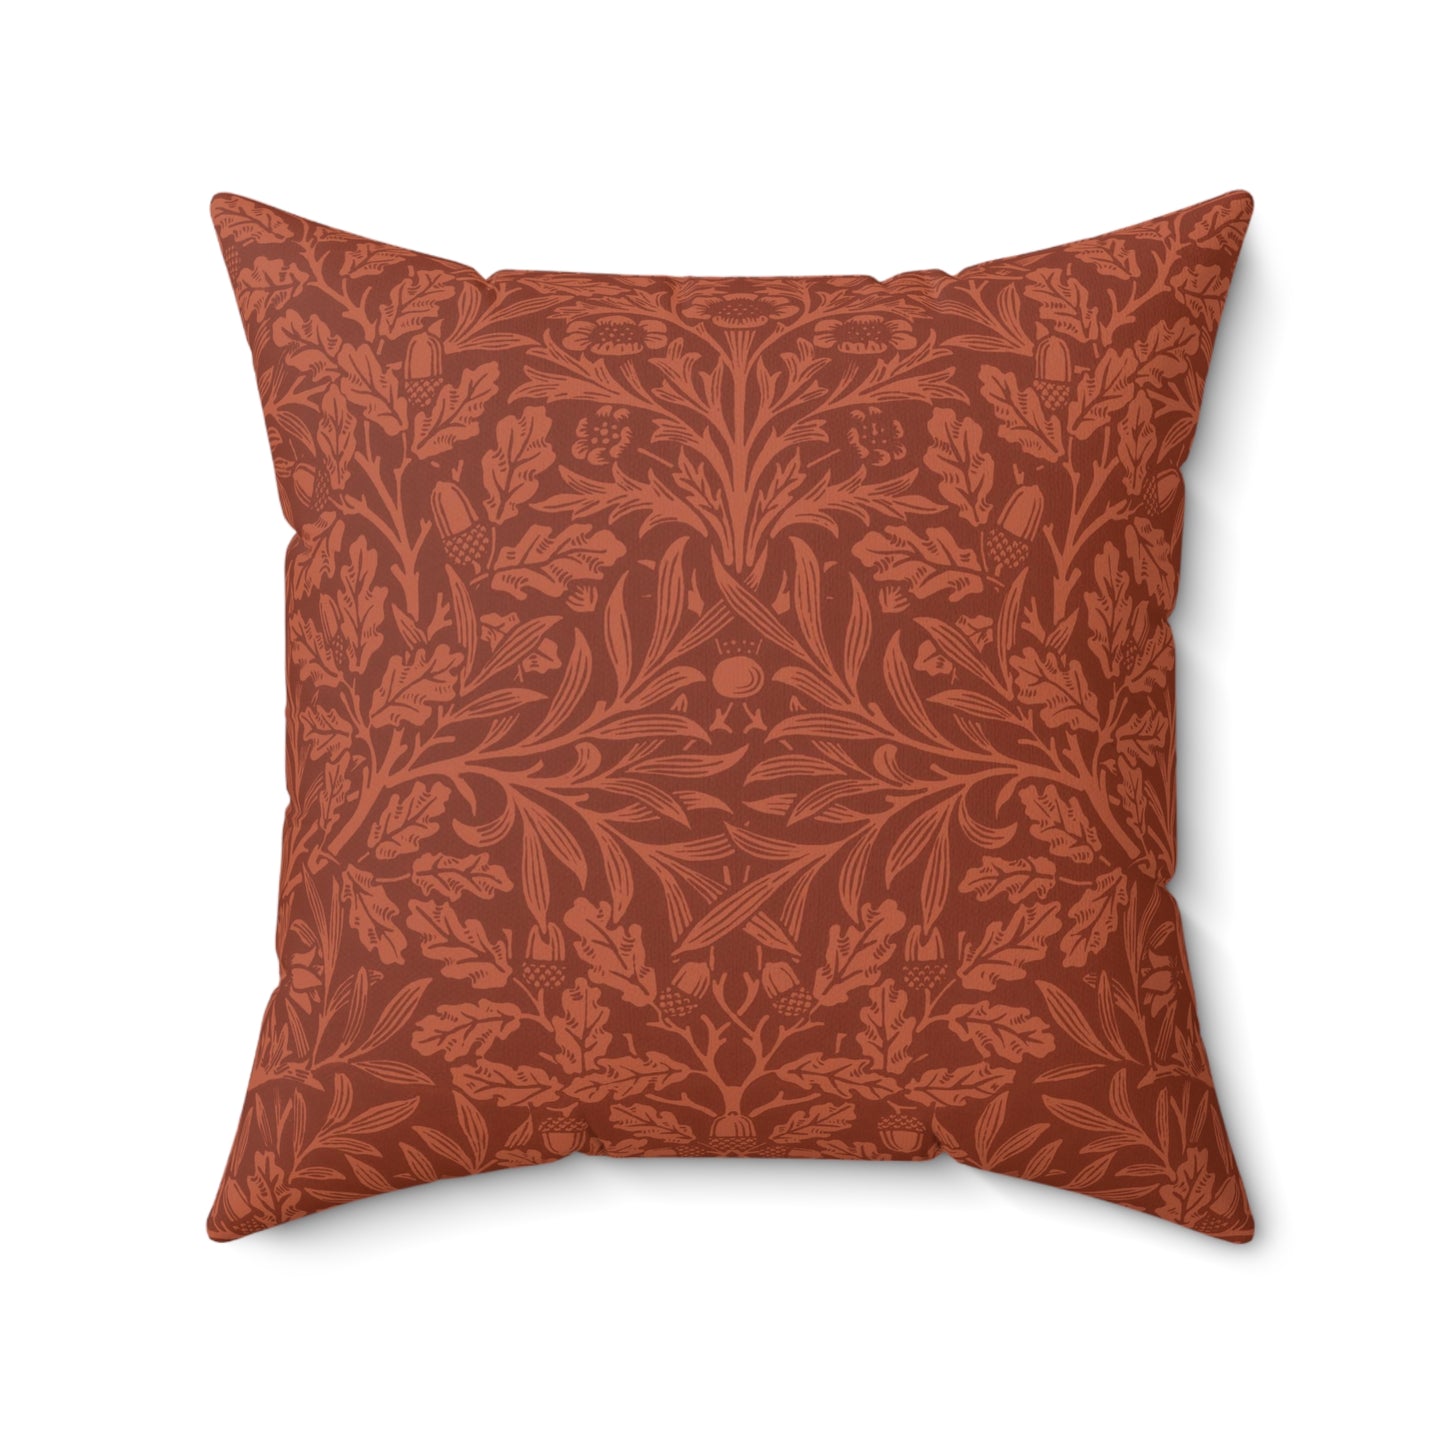 william-morris-co-faux-suede-cushion-acorns-and-oak-leaves-collection-rust-5